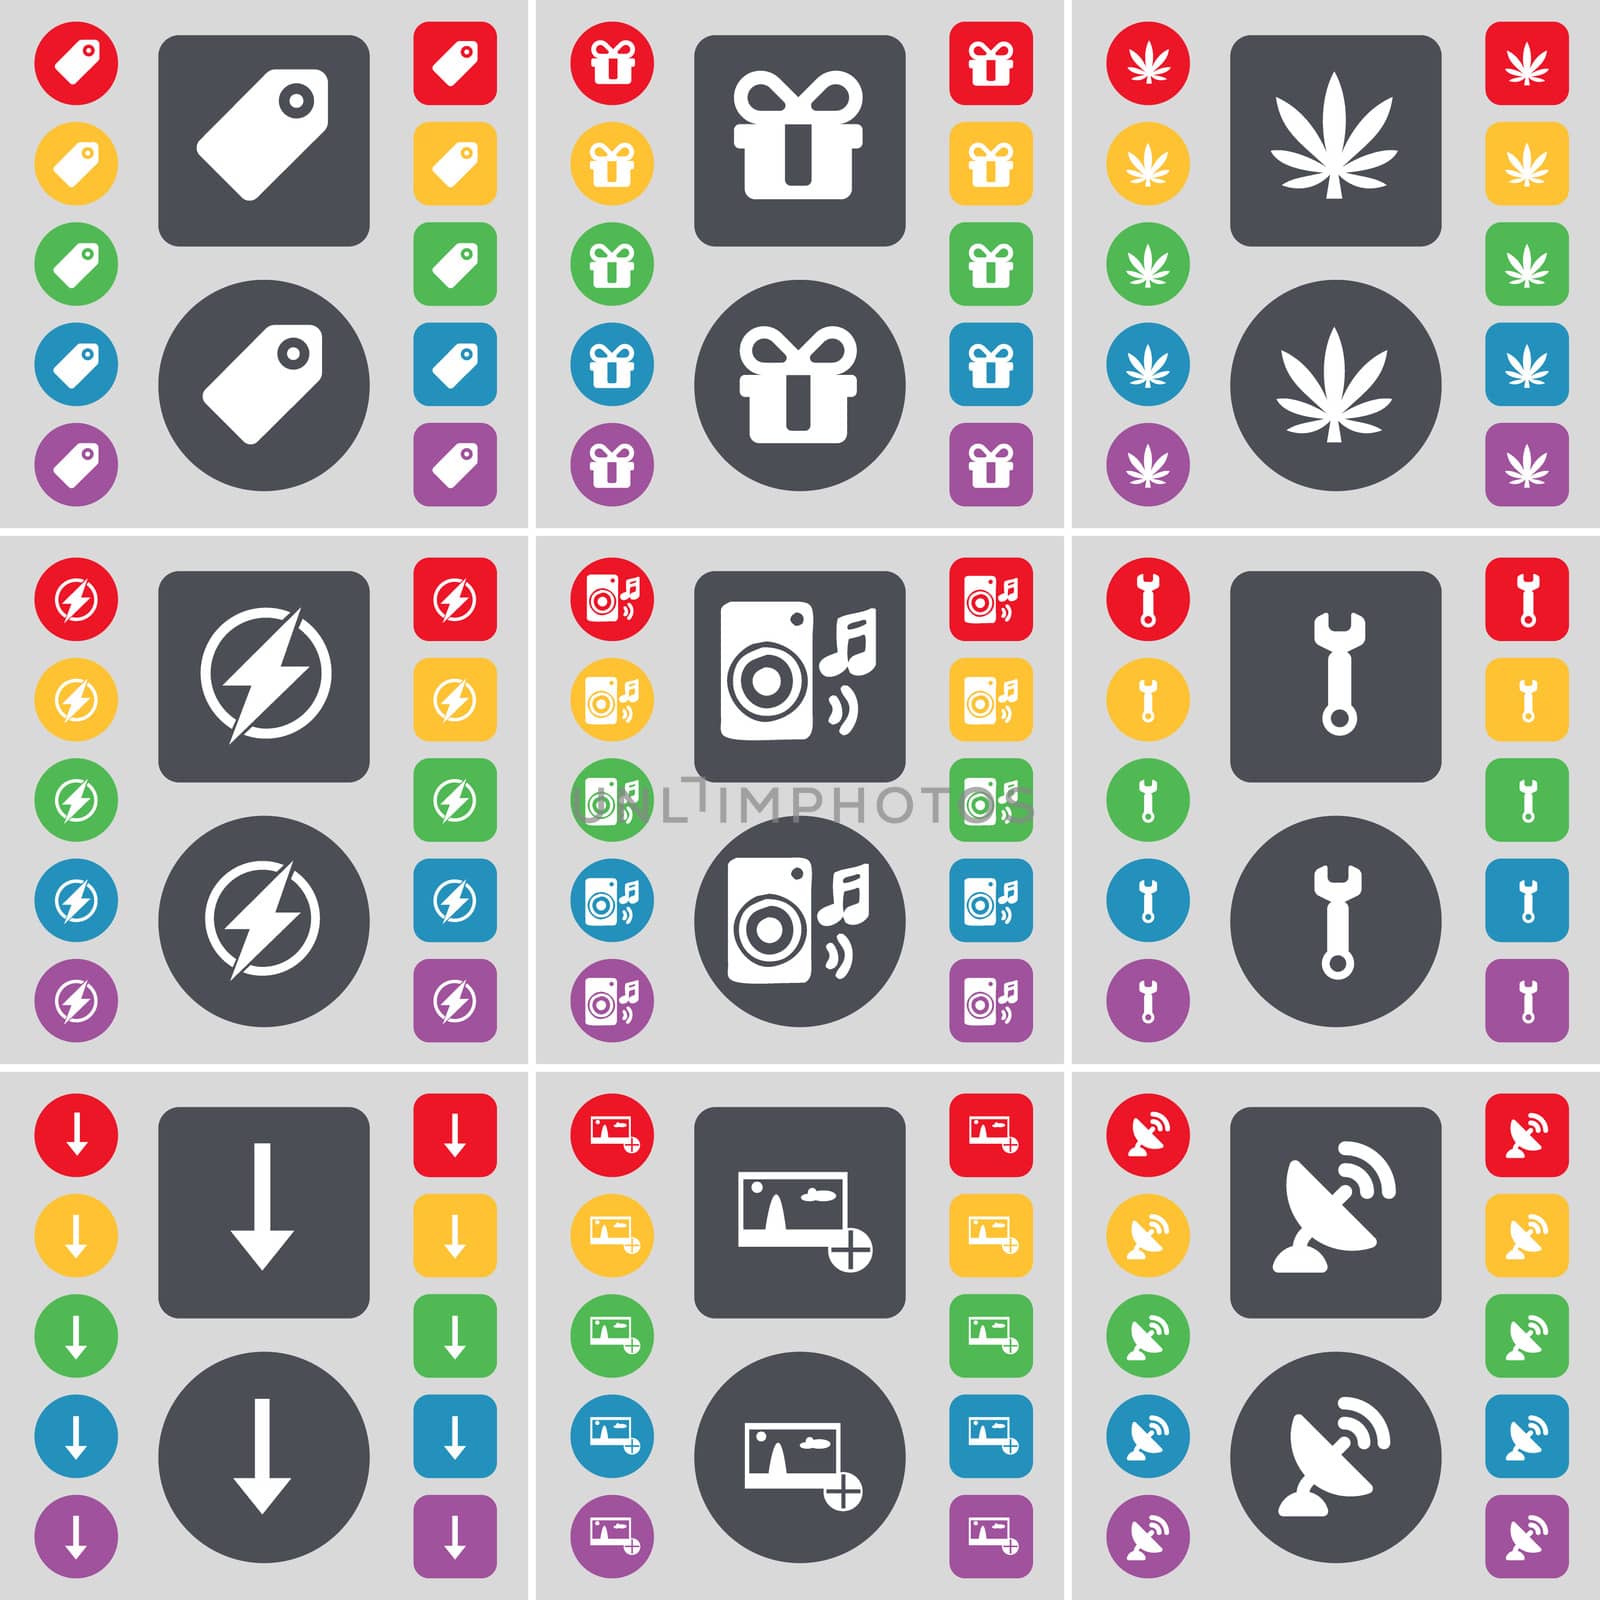 Tag, Gift, Marijuana, Flash, Speaker, Wrench, Arrow down, Picture, Satellite dish icon symbol. A large set of flat, colored buttons for your design.  by serhii_lohvyniuk